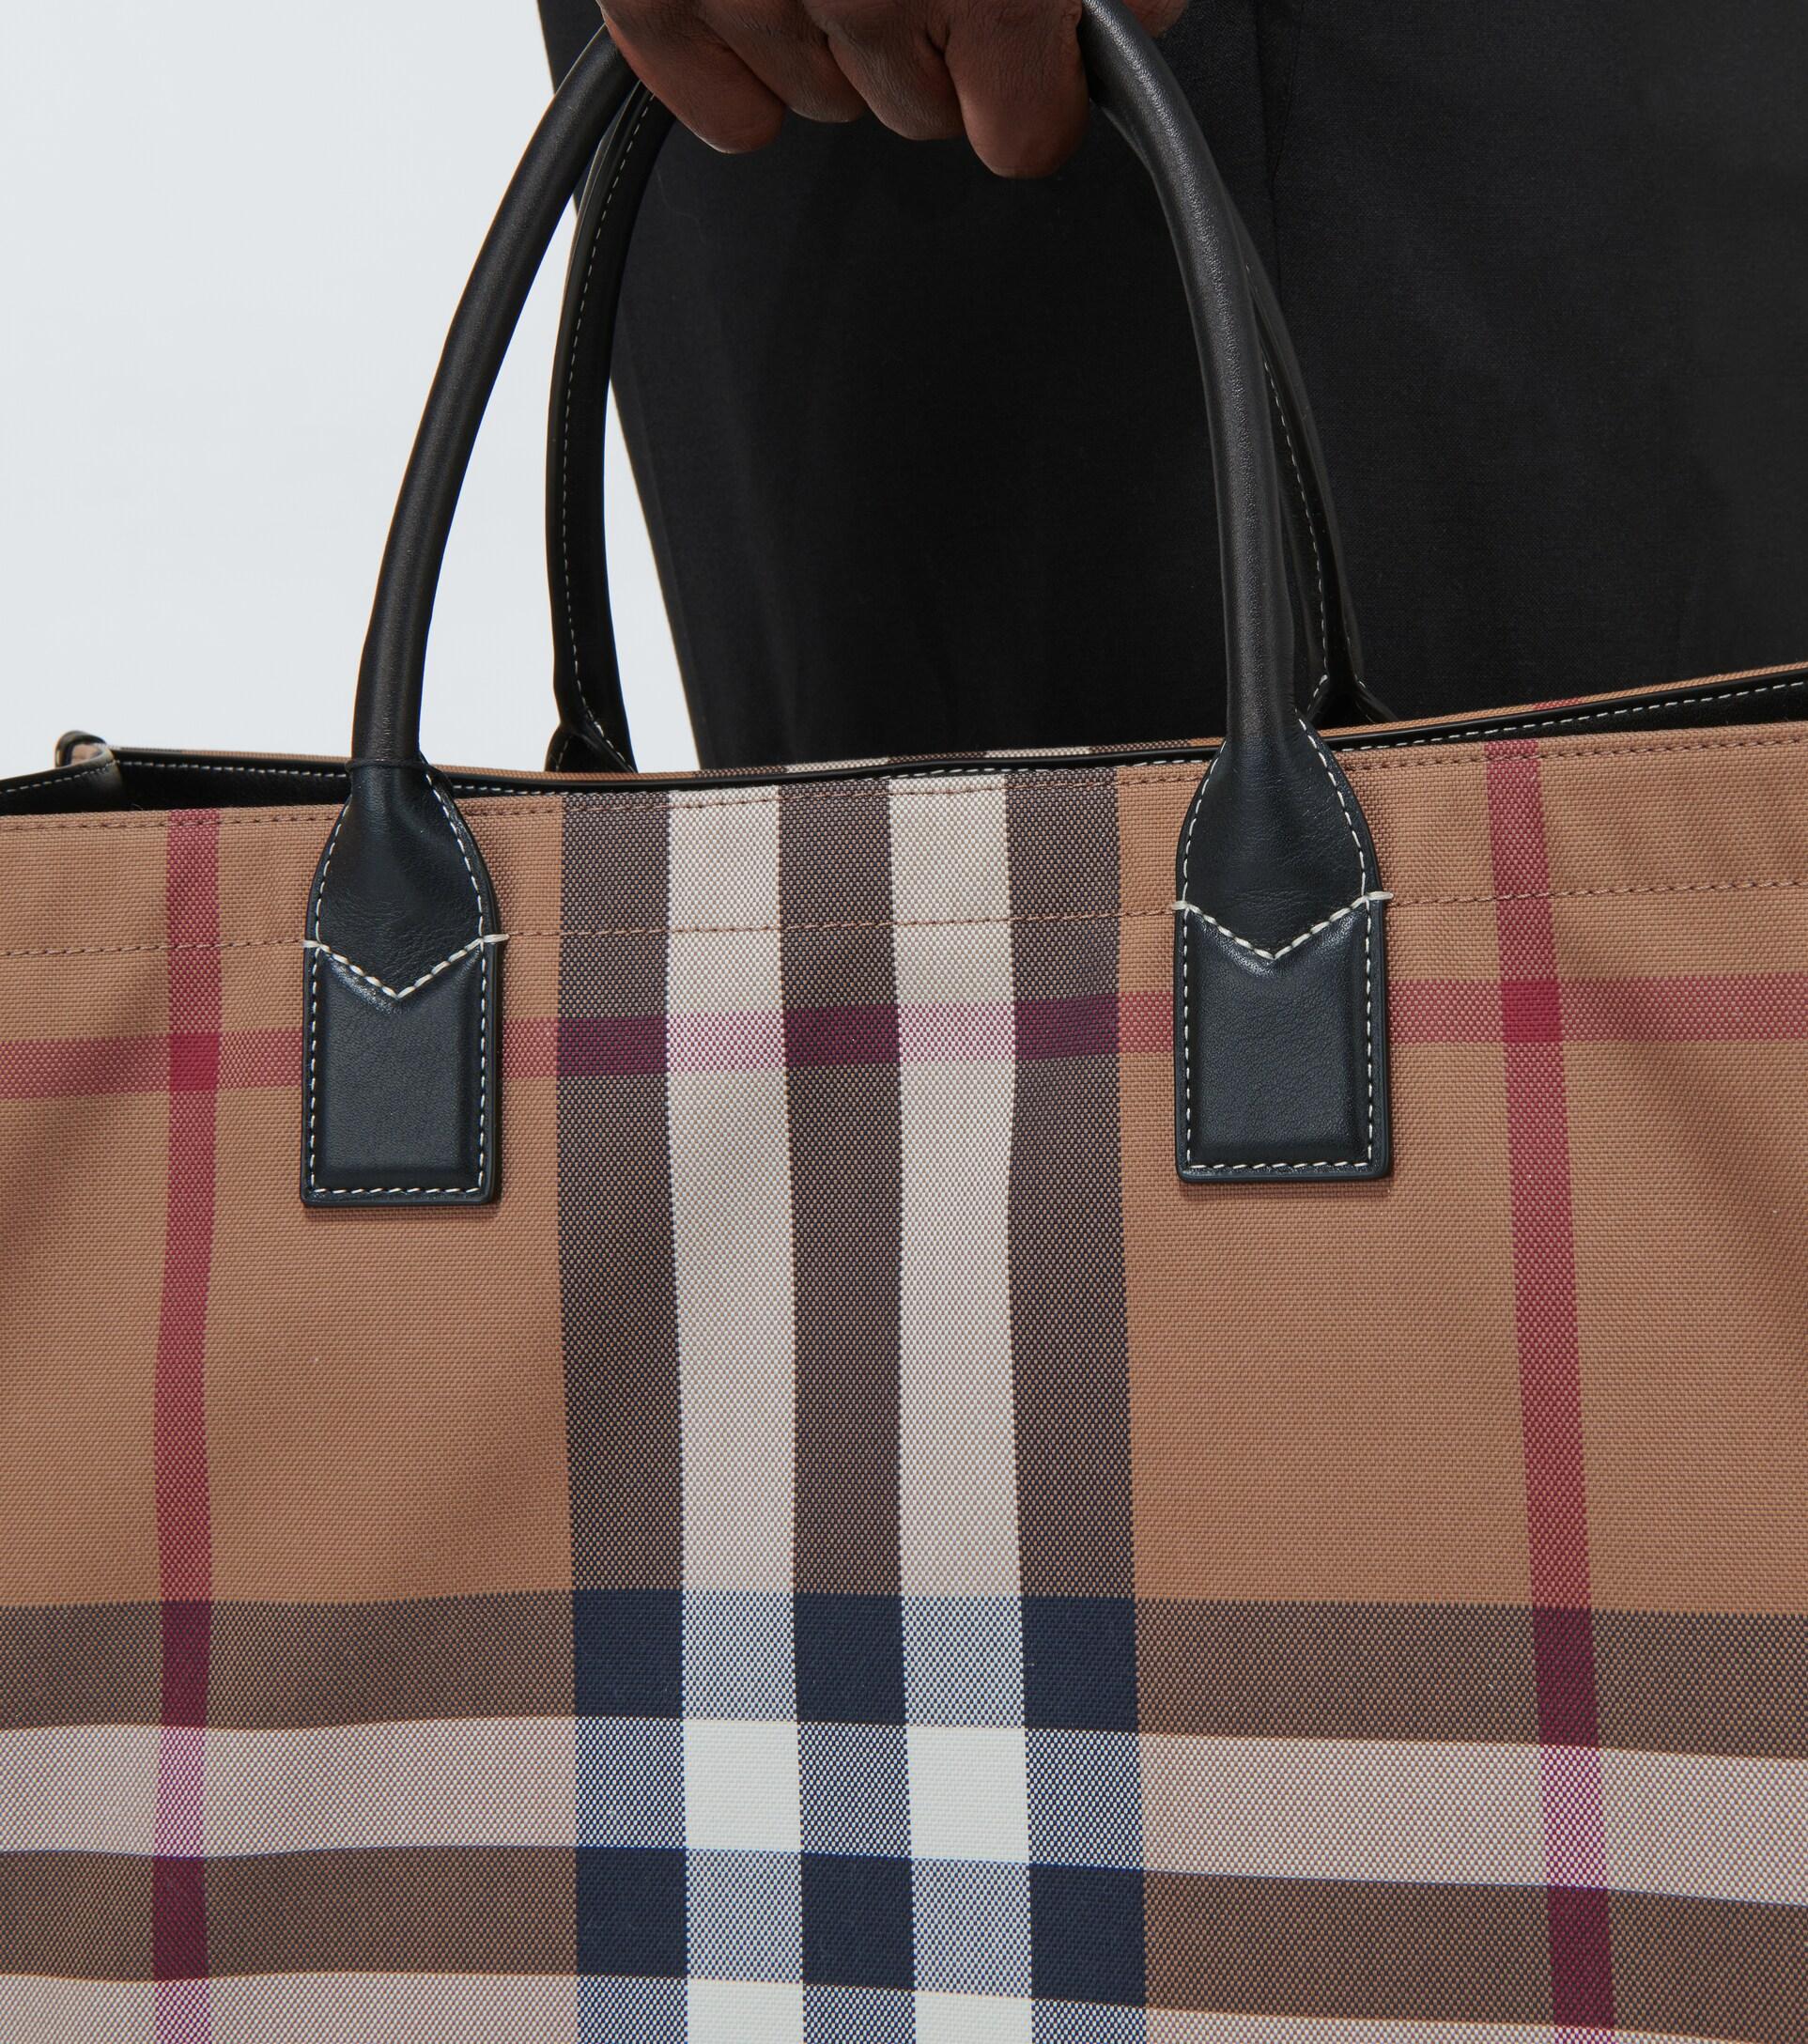 Denny checked tote bag in brown - Burberry